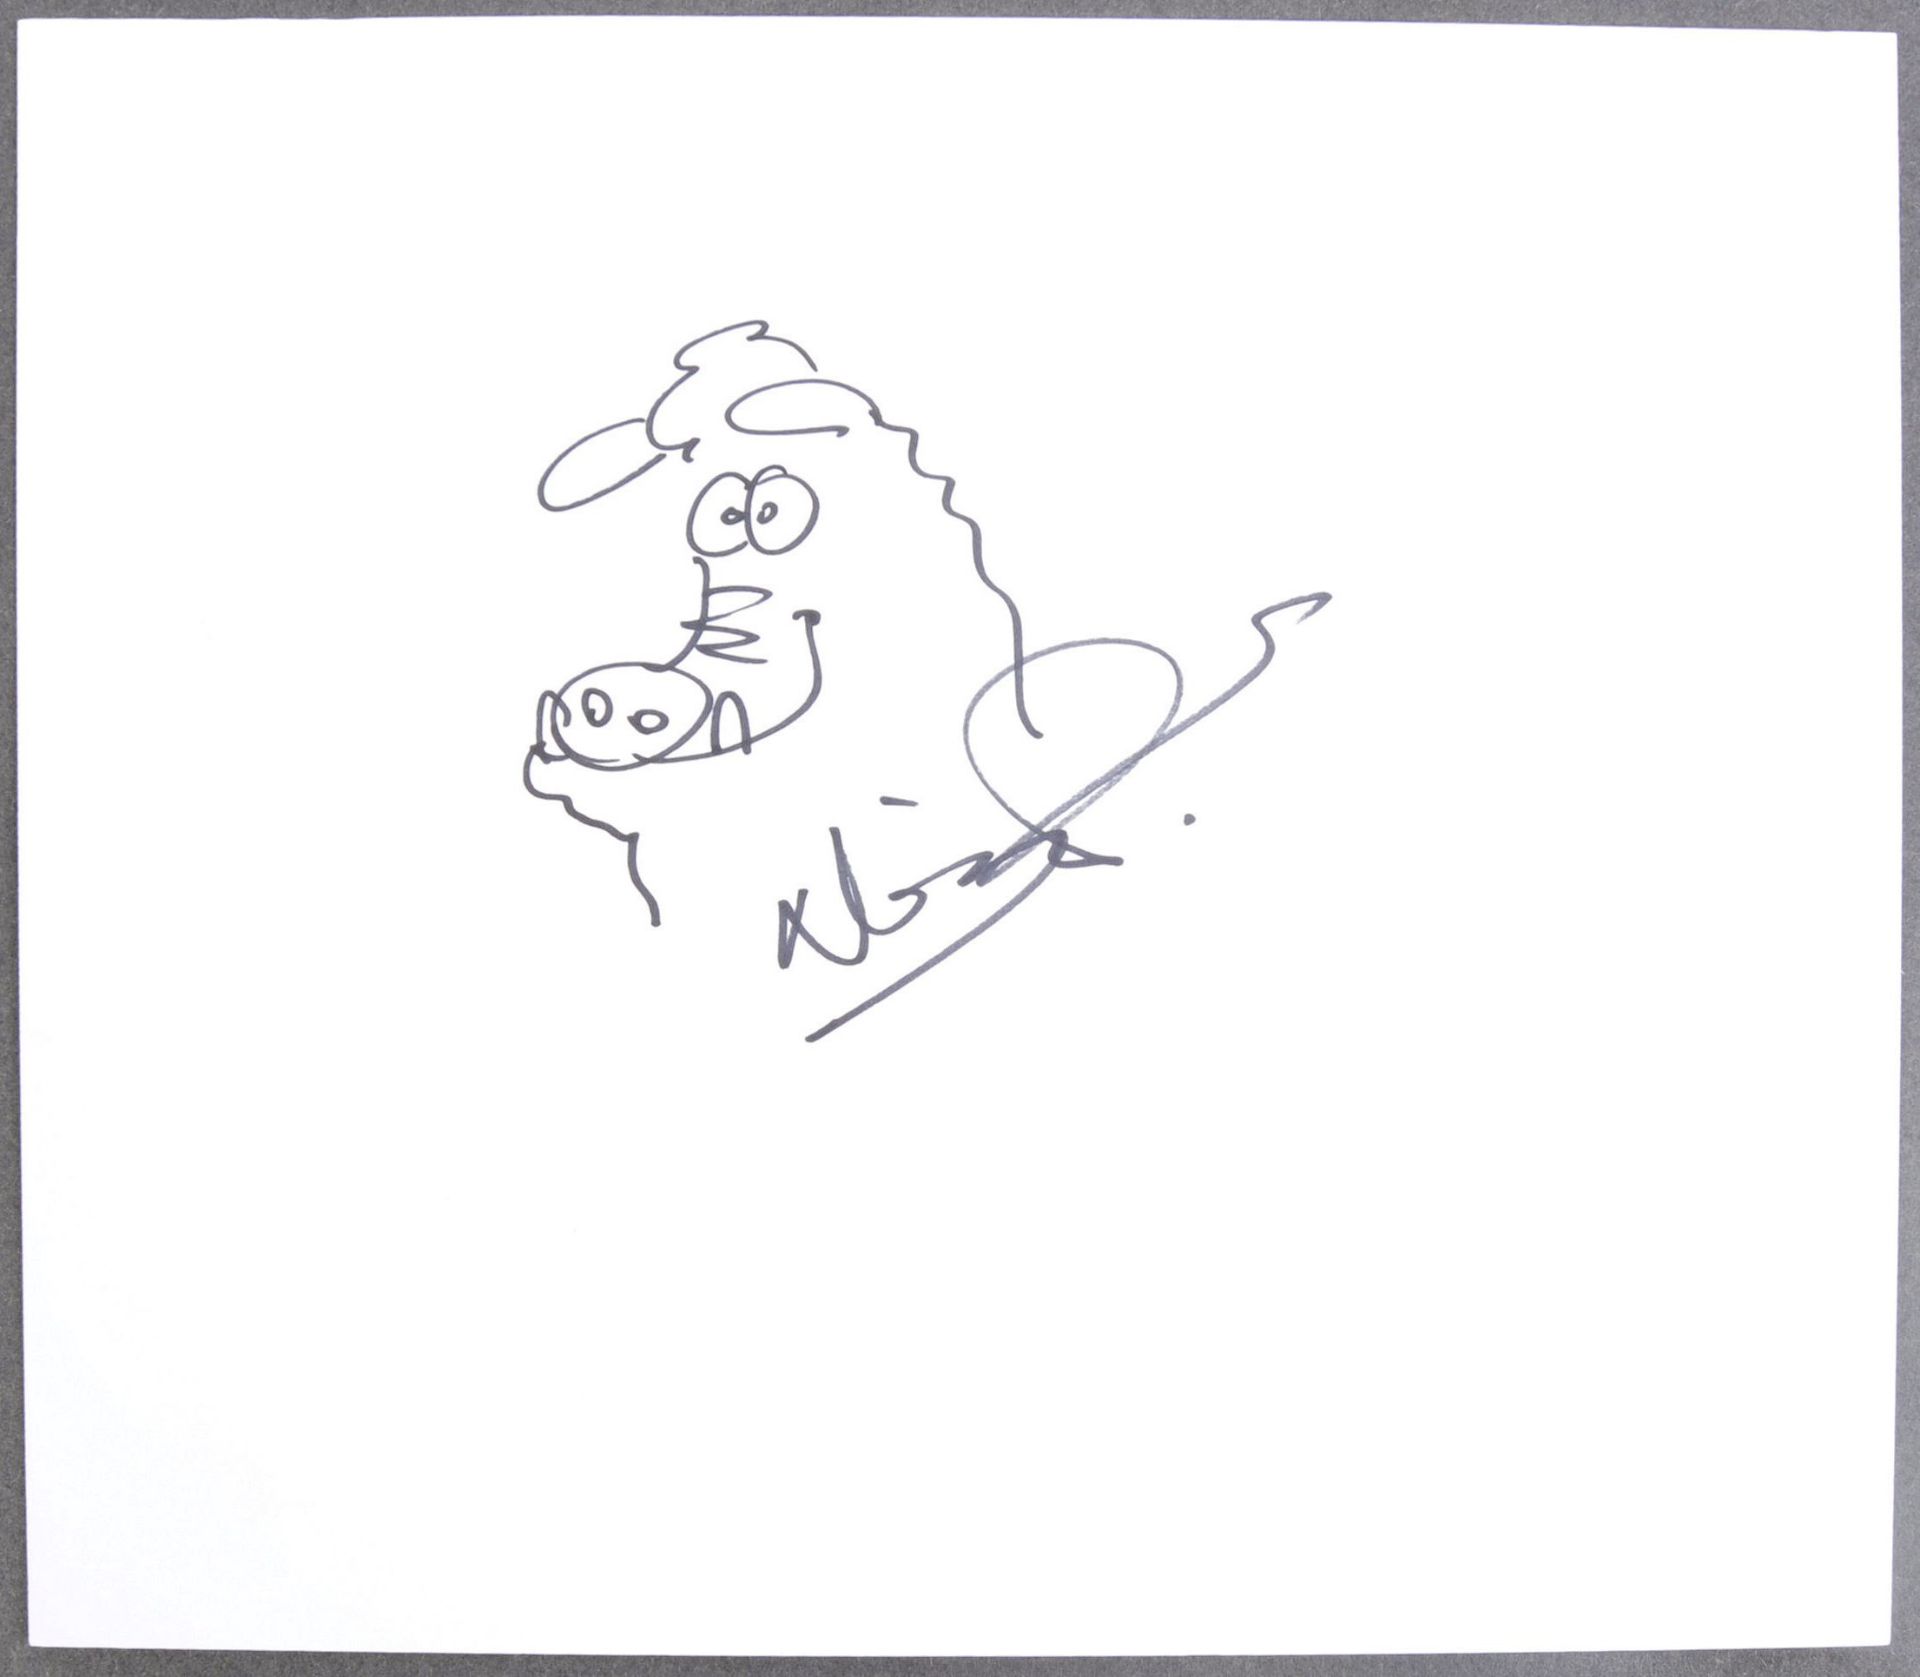 AARDMAN ANIMATIONS - NICK PARK - EARLY MAN AUTOGRAPHED SKETCH